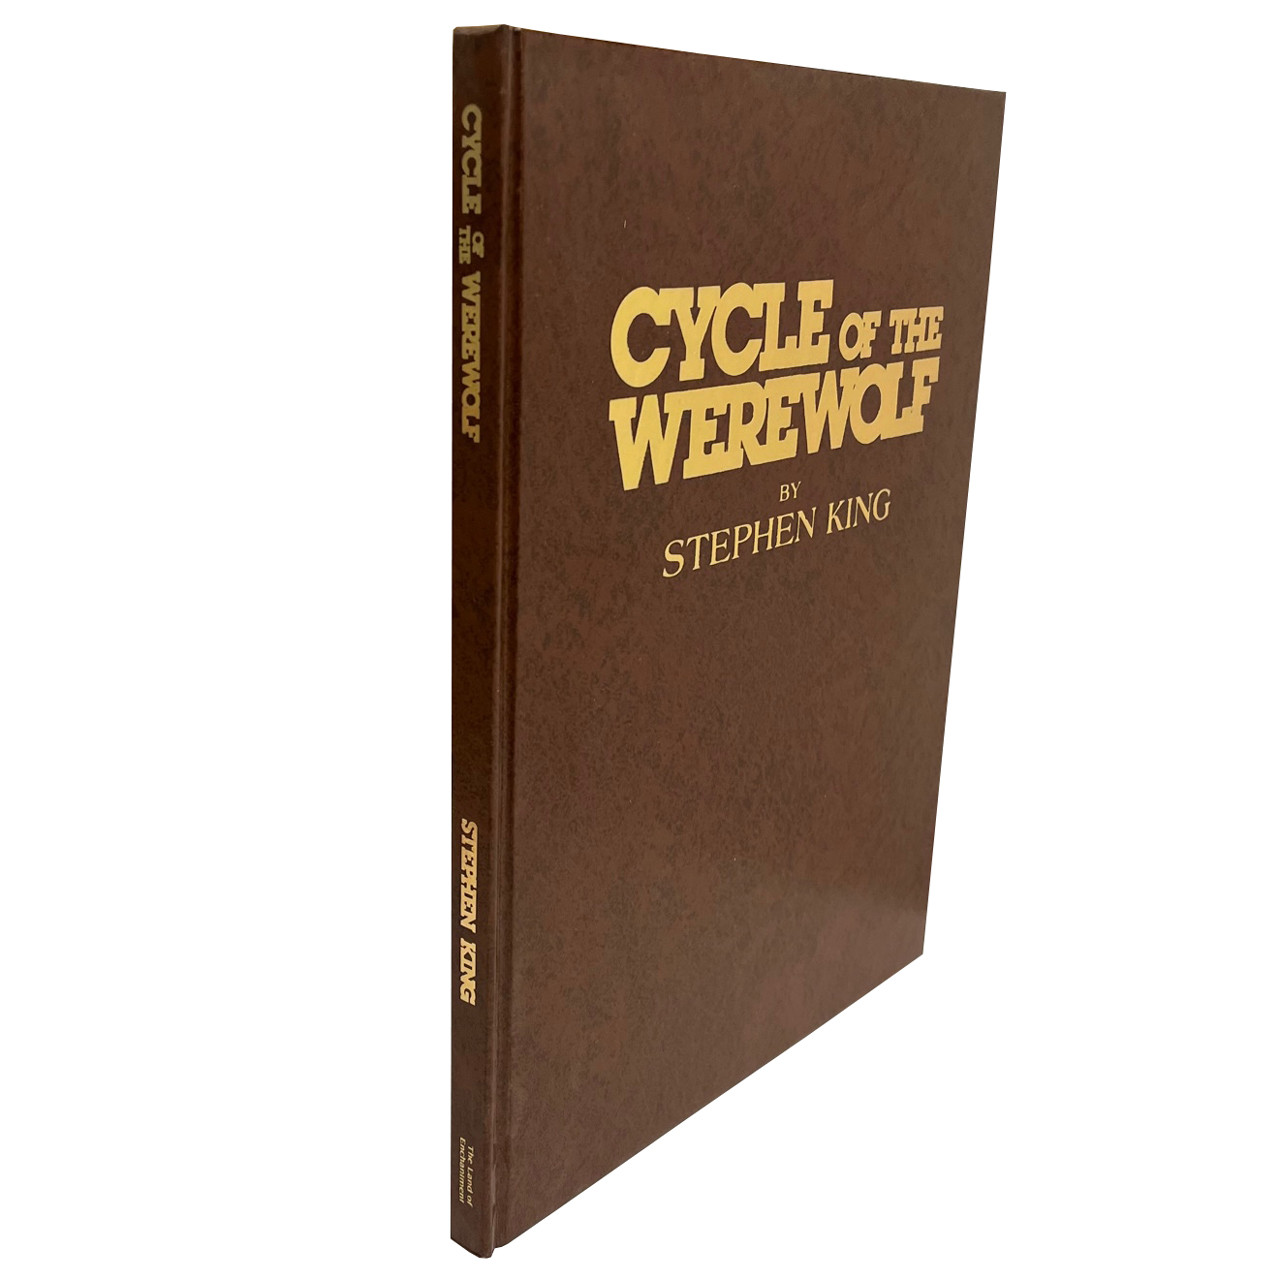 Stephen King "Cycle of the Werewolf" Slipcased Limited First Edition of 7,500 [F/NF+]